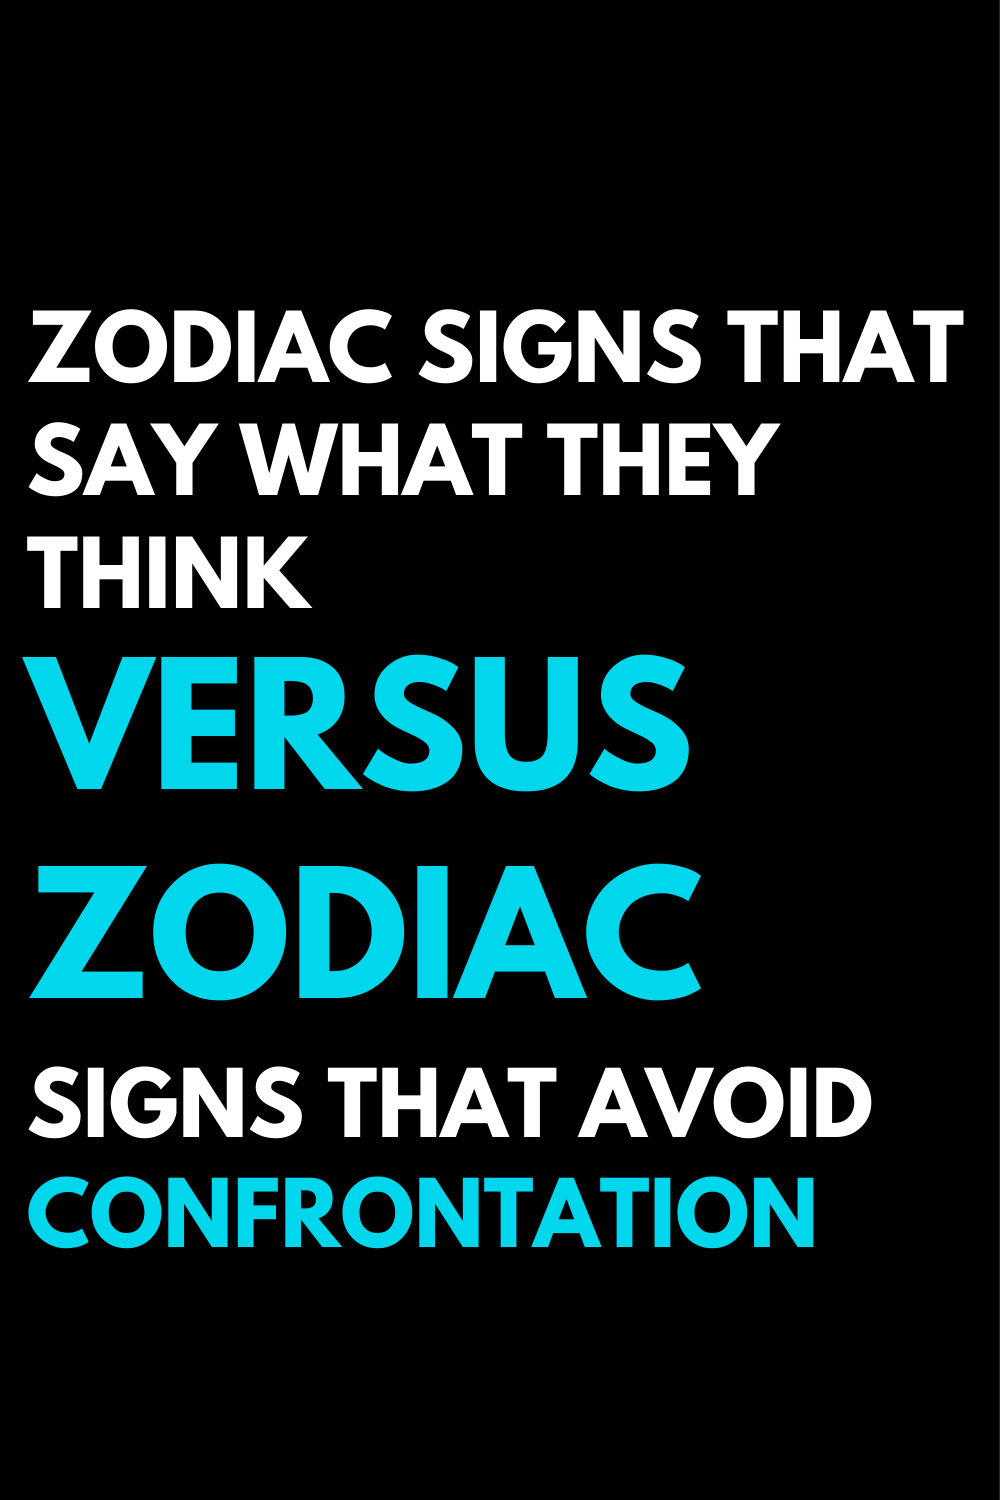 Zodiac signs that say what they think versus zodiac signs that avoid confrontation